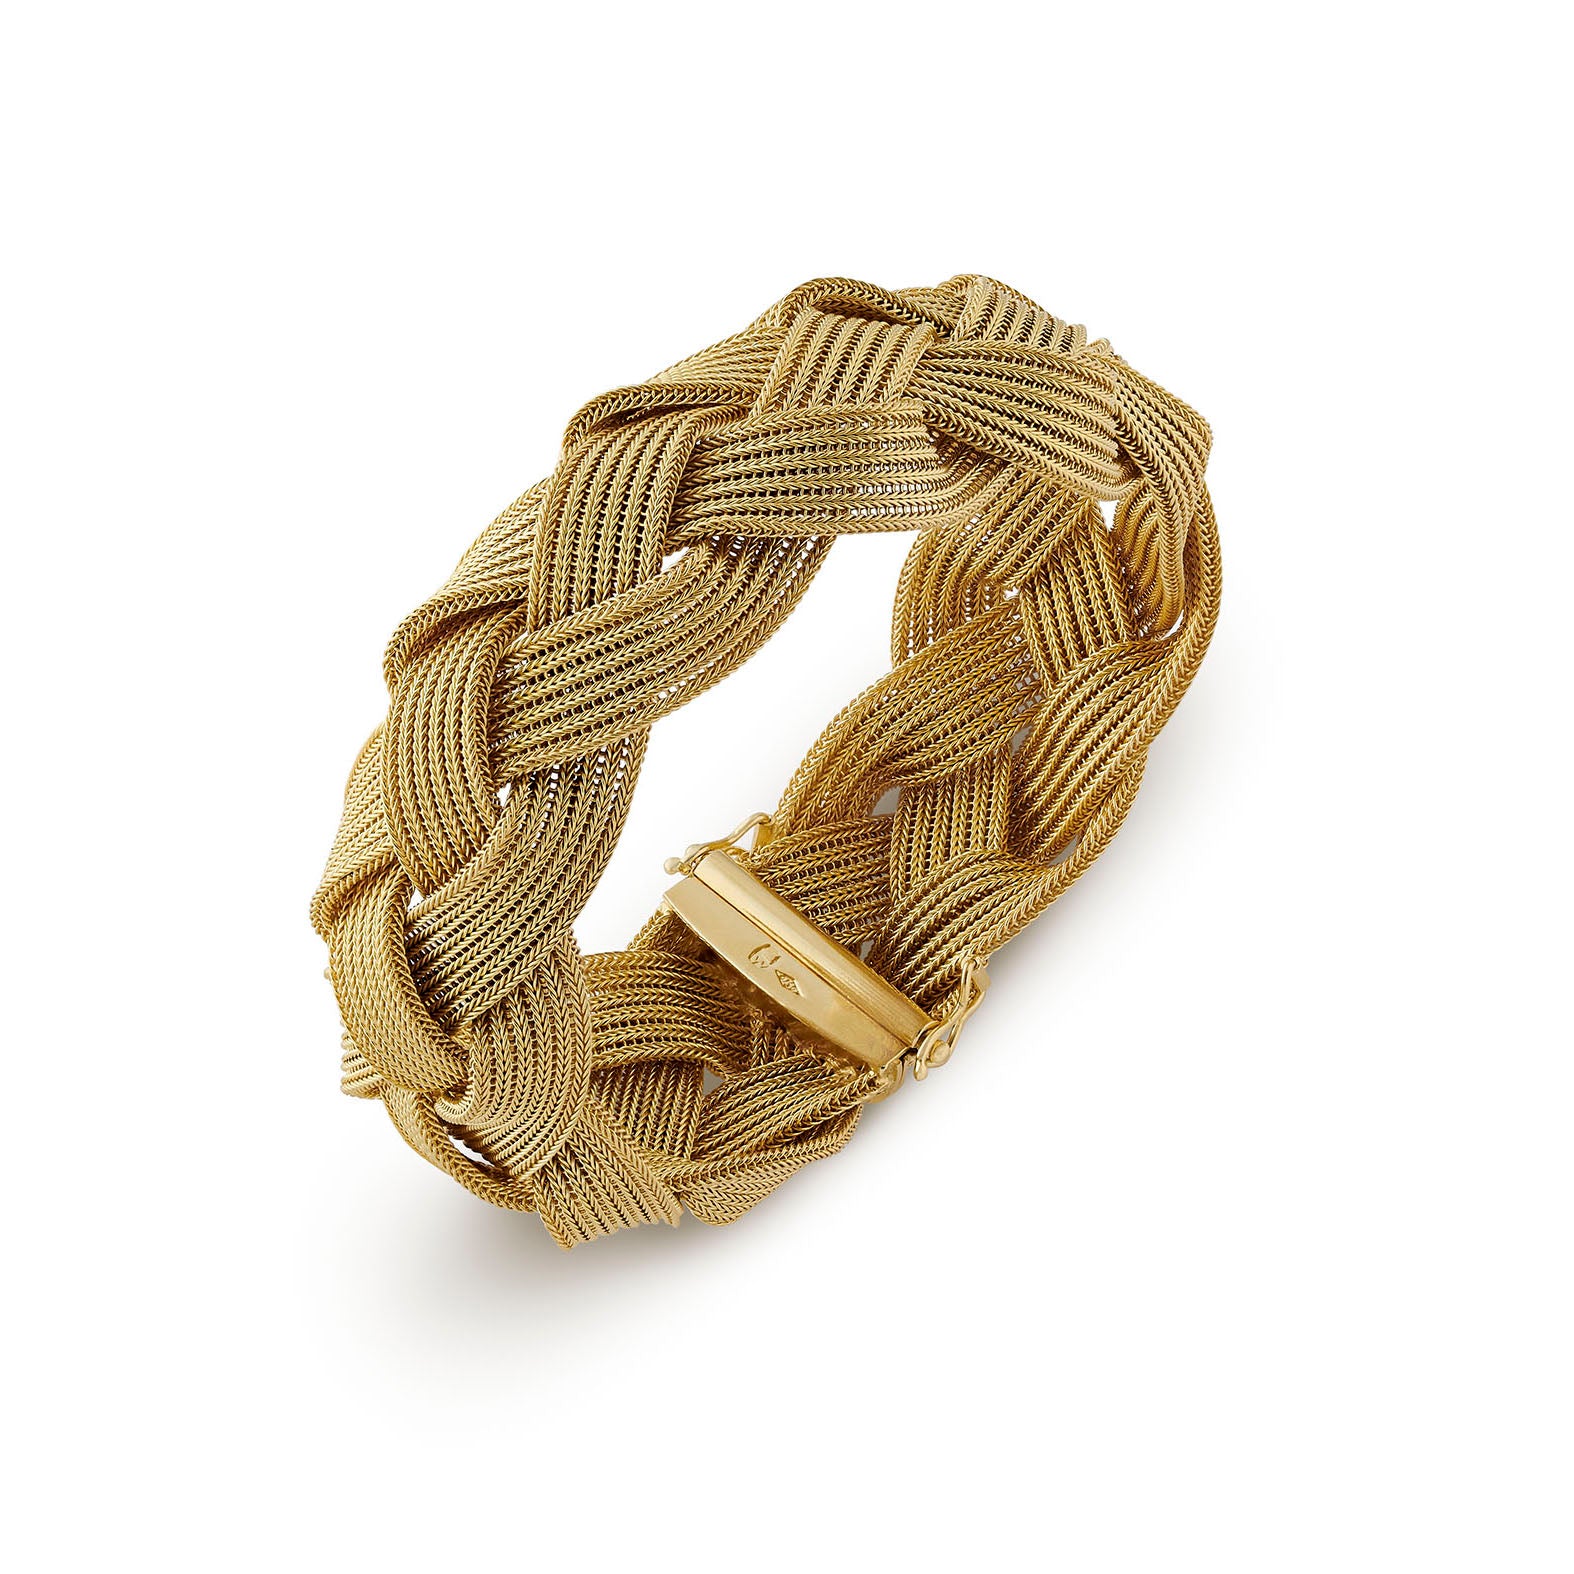 1970's 18ct yellow gold plait bracelet by Wolfers